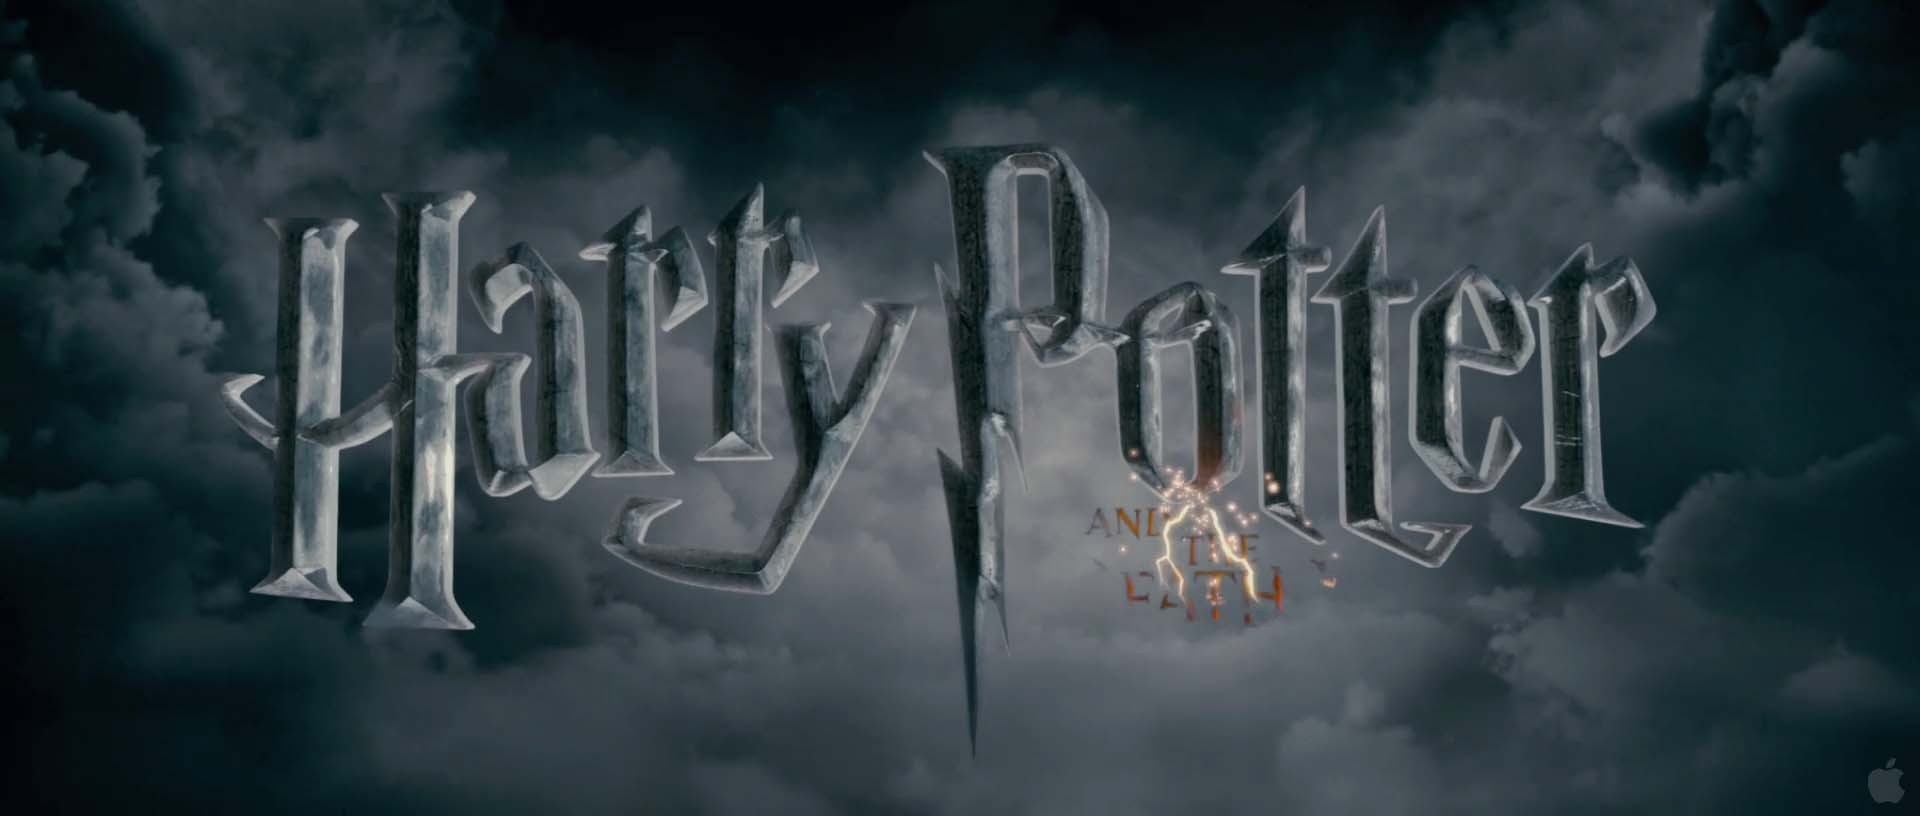 when does the official trailer for harry potter and the deathly hallows come out